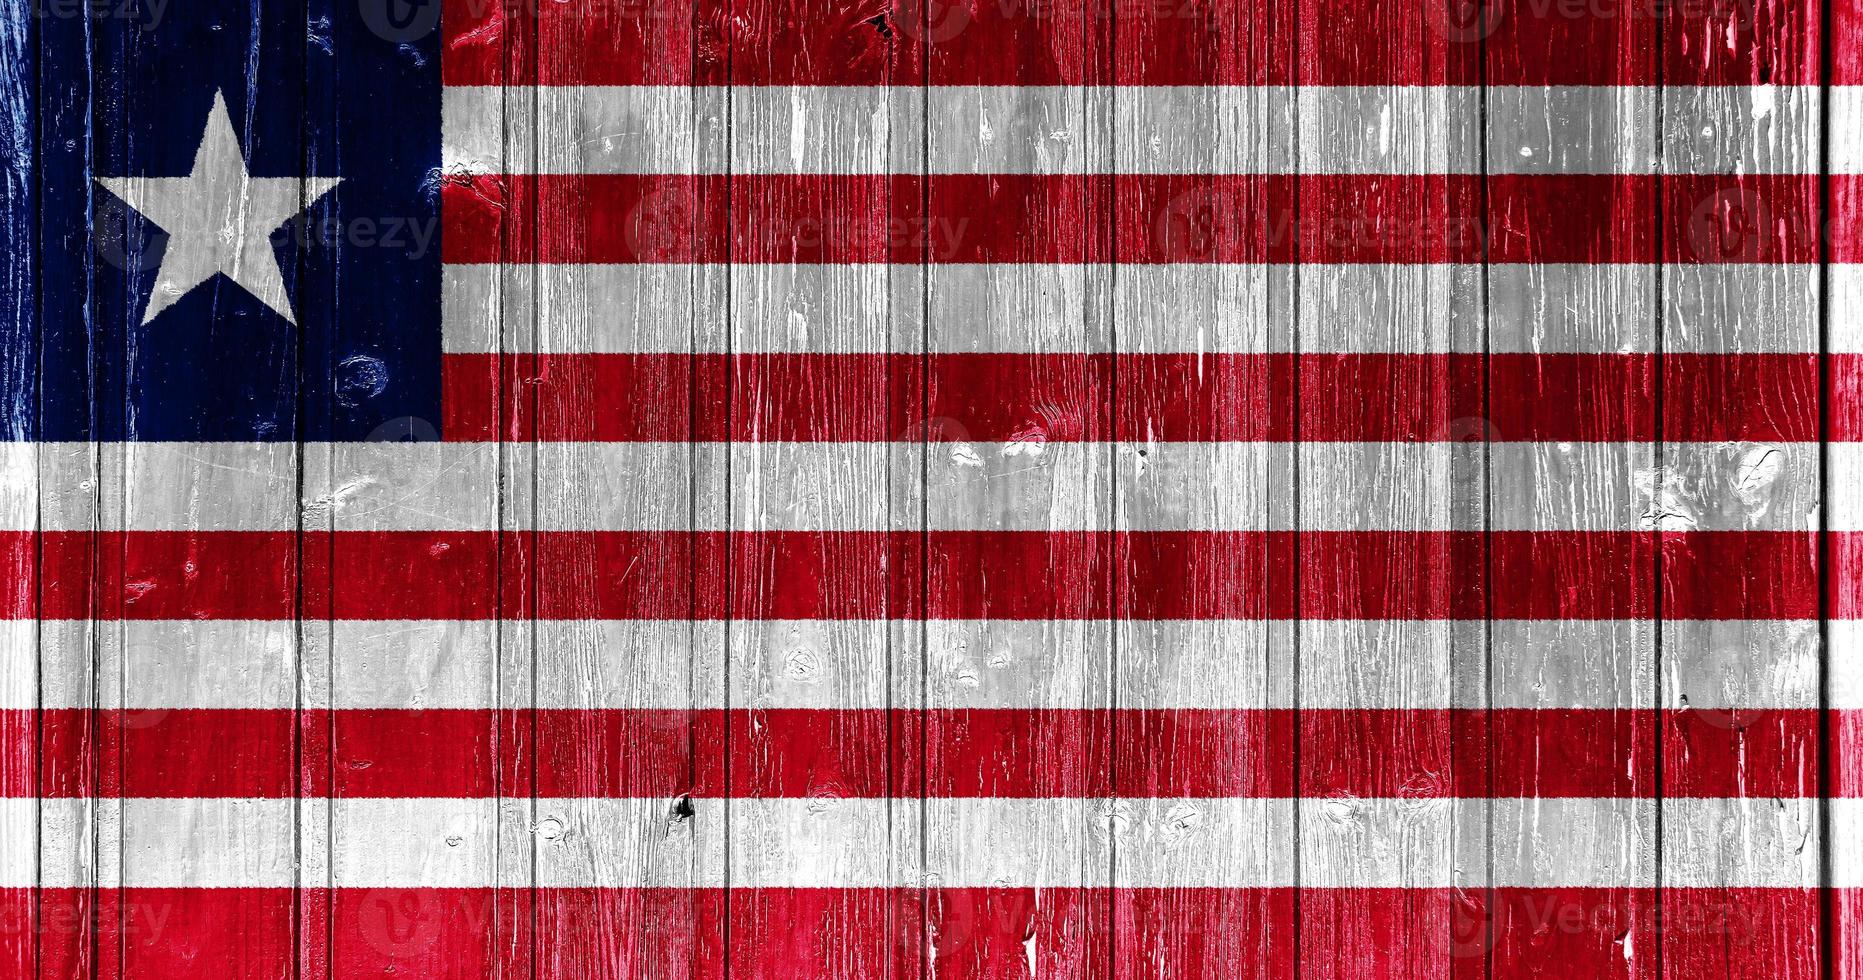 Flag of Liberia on a textured background. Concept collage. photo